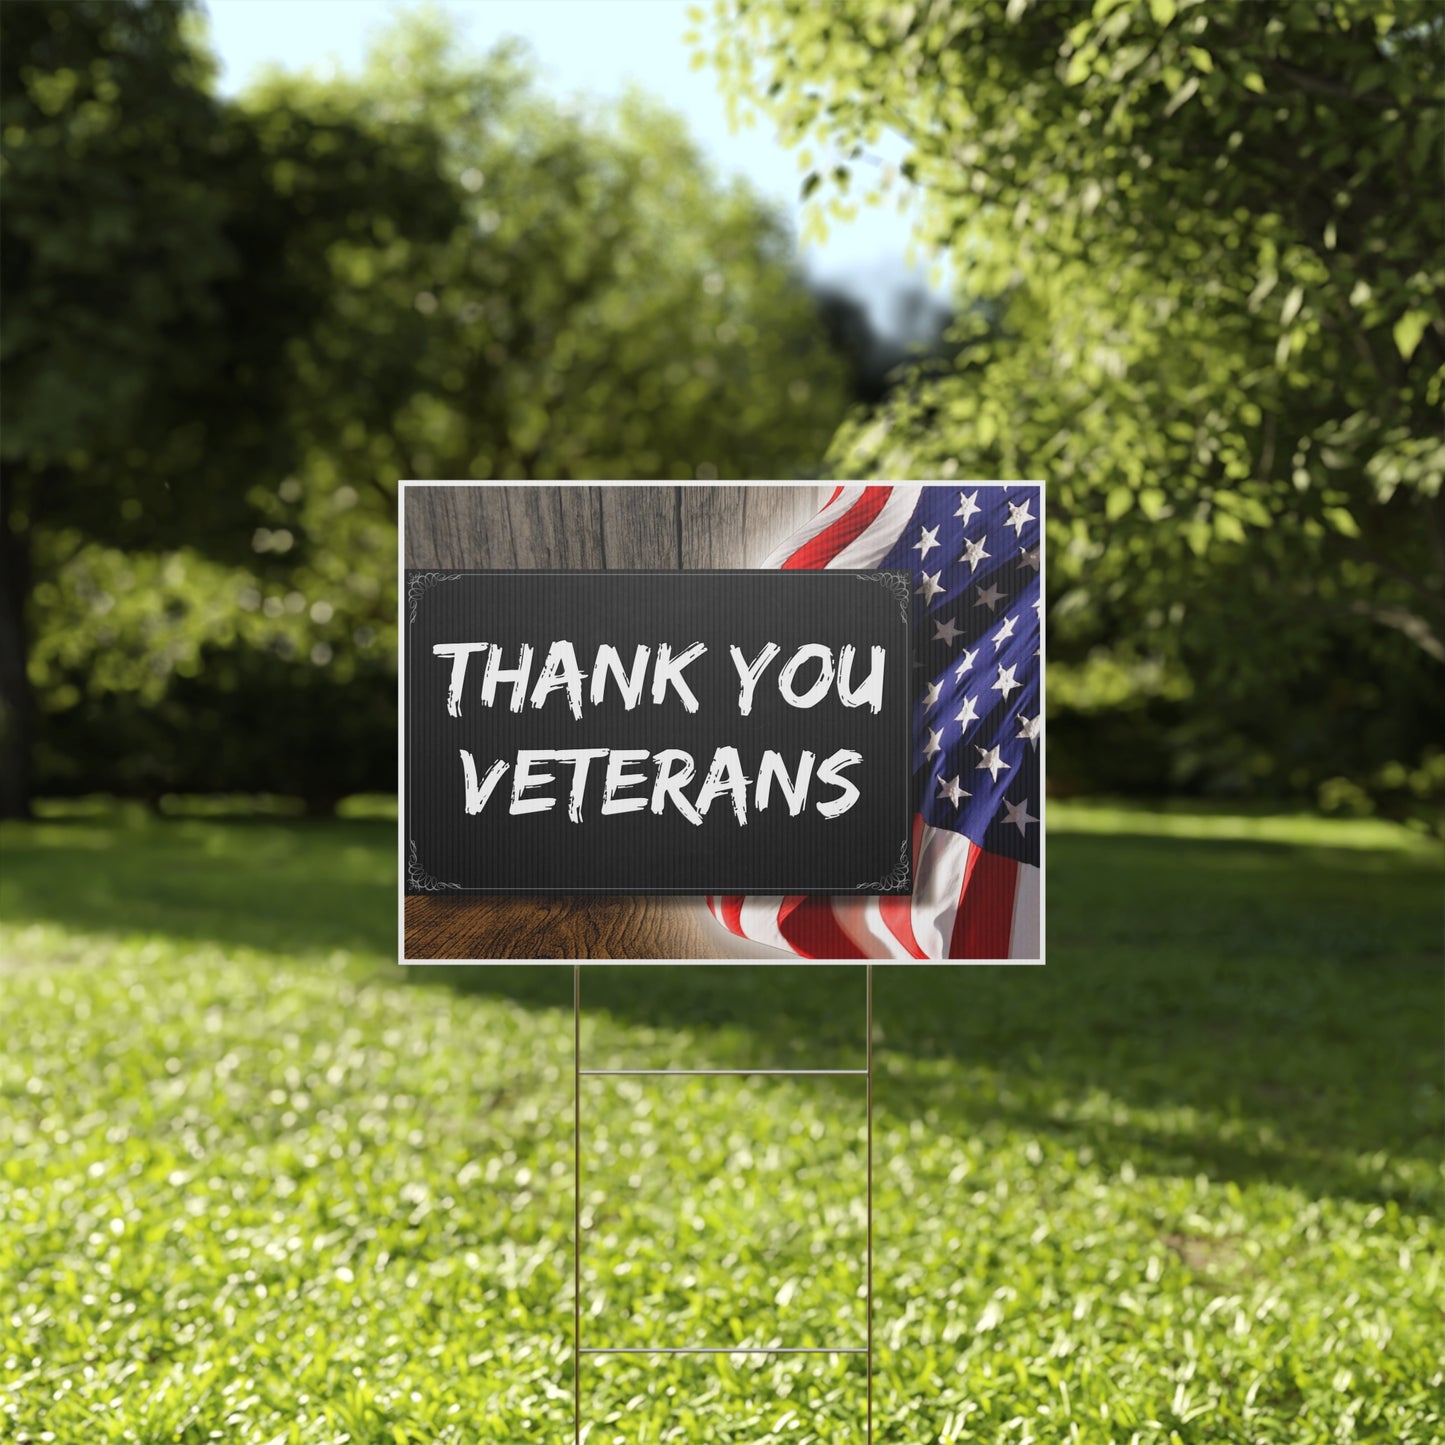 Thank You Veterans, American Flag, Veteran's Day, Yard Sign, Printed 2-Sided, 12x18, 24x18 or 36x24, Metal H-Stake Included, v1